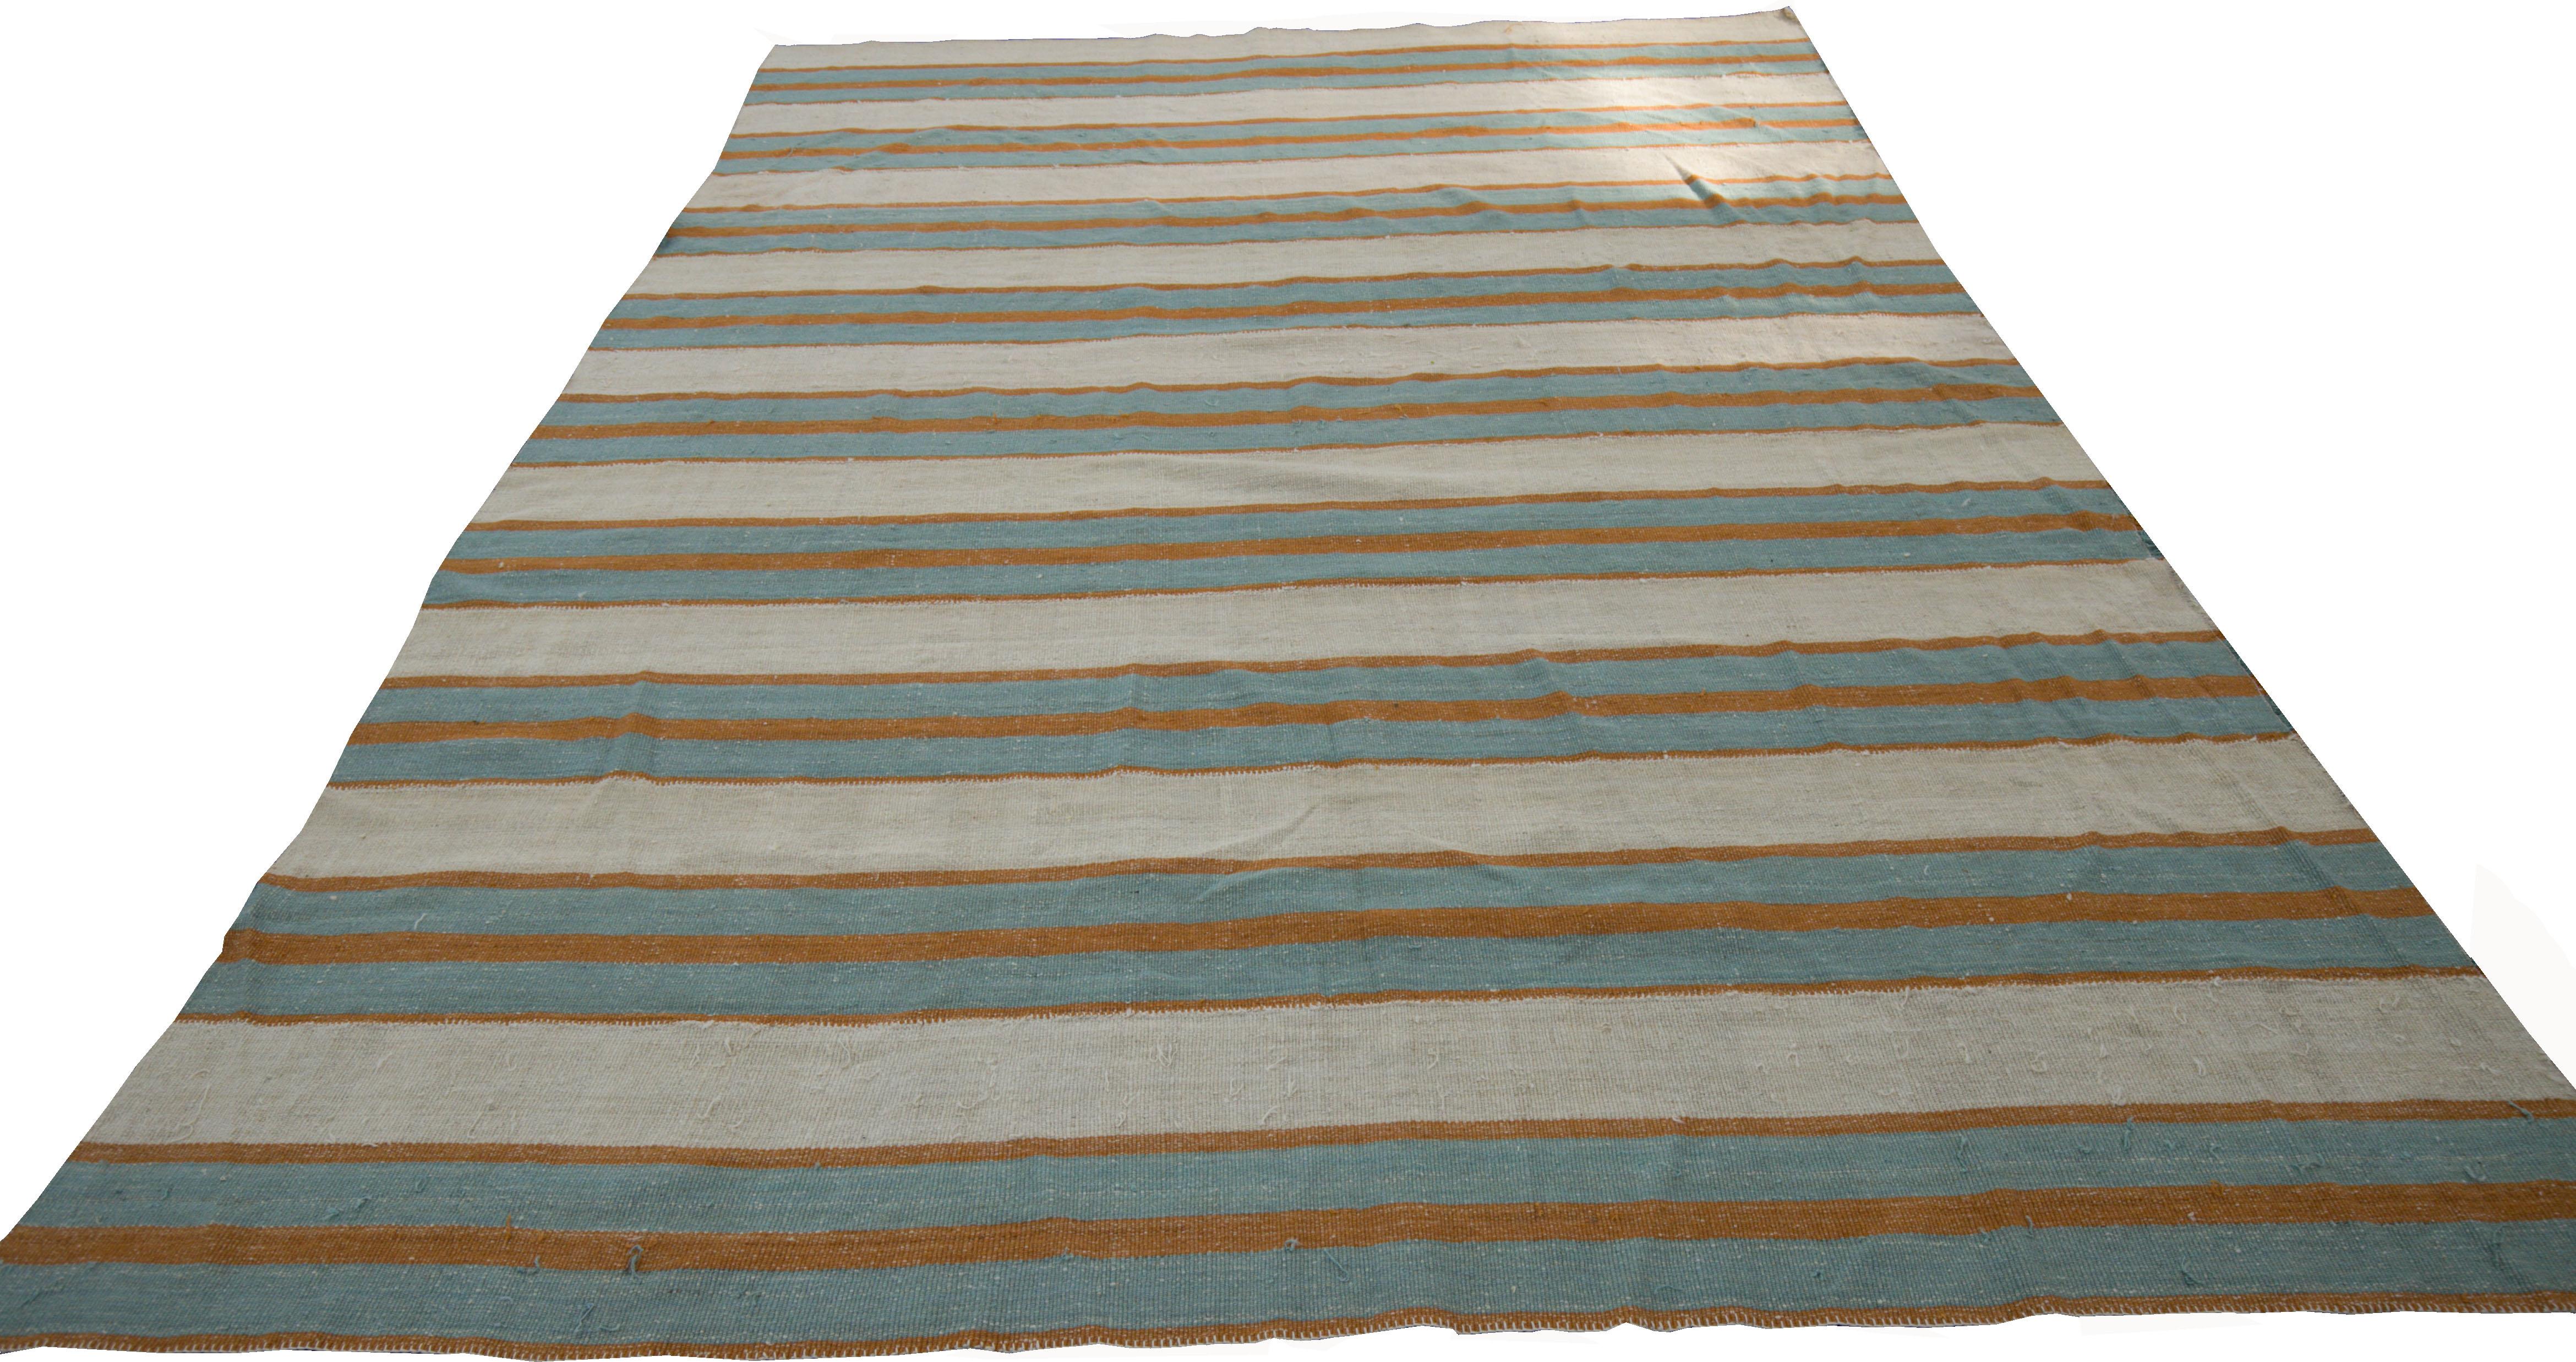 A new production Persian rug handwoven from the finest sheep’s wool and colored with all-natural vegetable dyes that are safe for humans and pets. It’s a traditional Kilim flat-weave design featuring a lovely ivory field with blue and orange